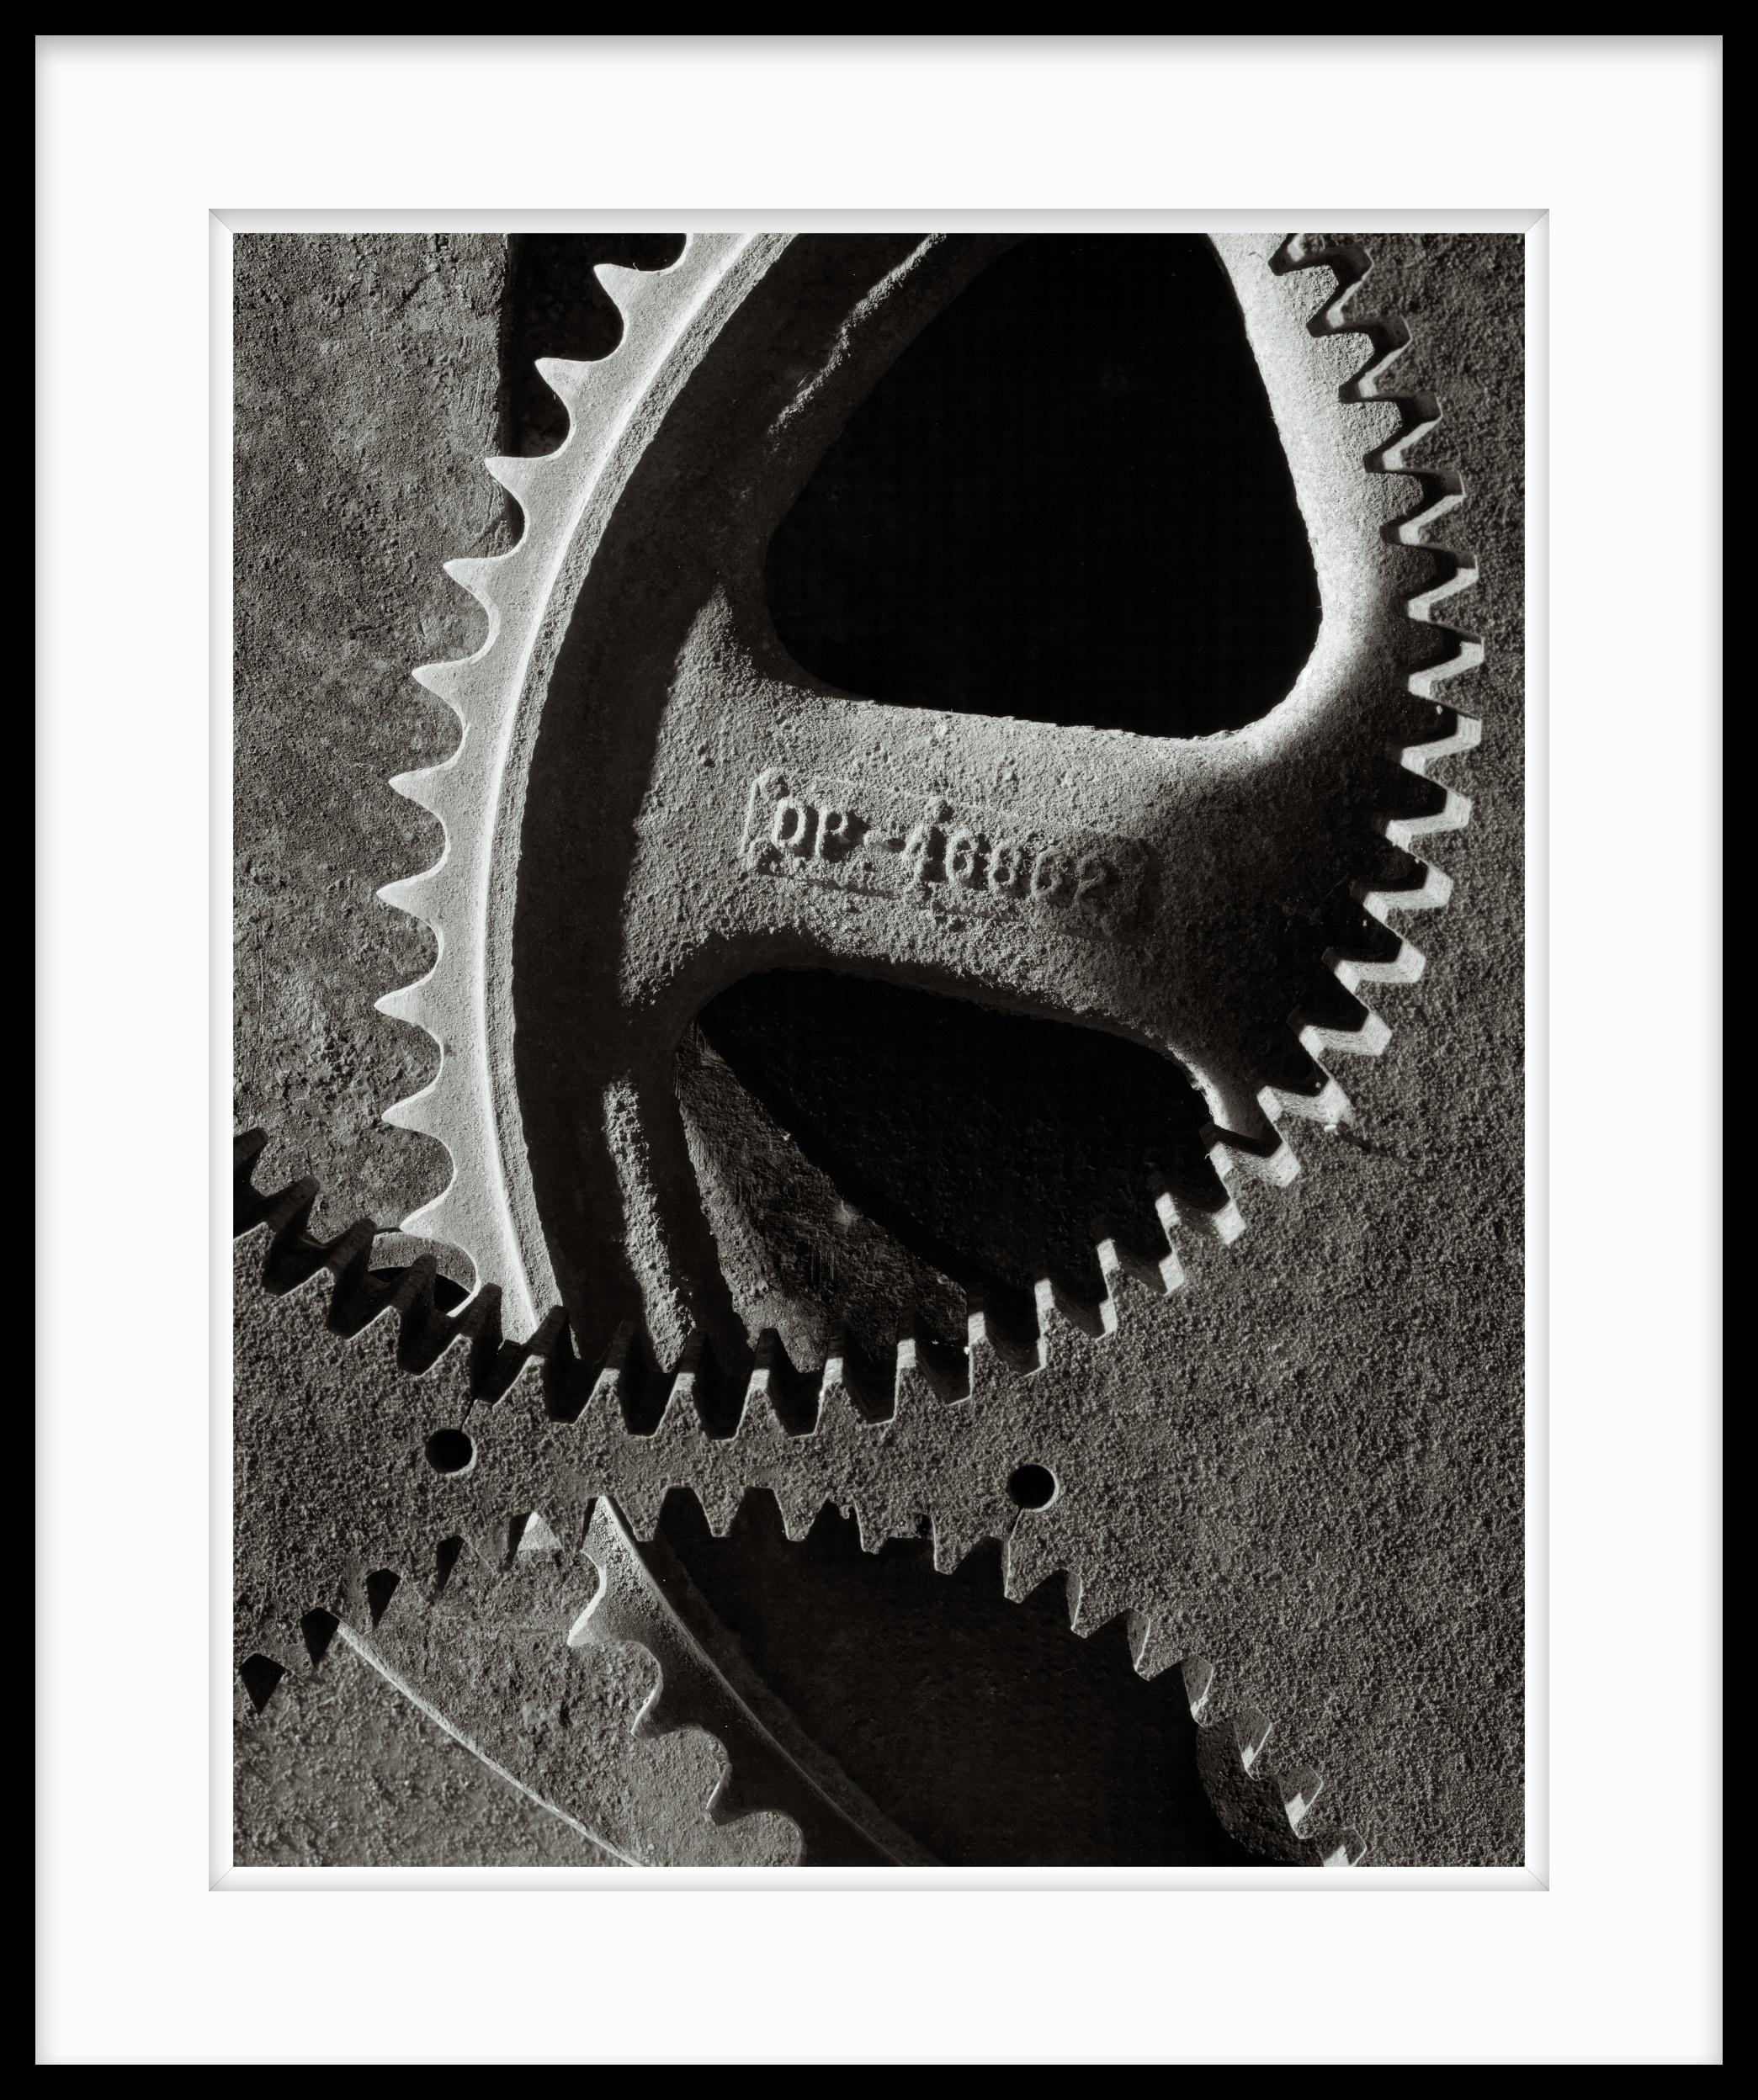  Limited Edition Black and White Still Life Photography, Inner Workings #1

This image is #1 in the Inner Working series.

I grew up in an environment of invention and engineering, which led me to create photographs using gears, springs and other